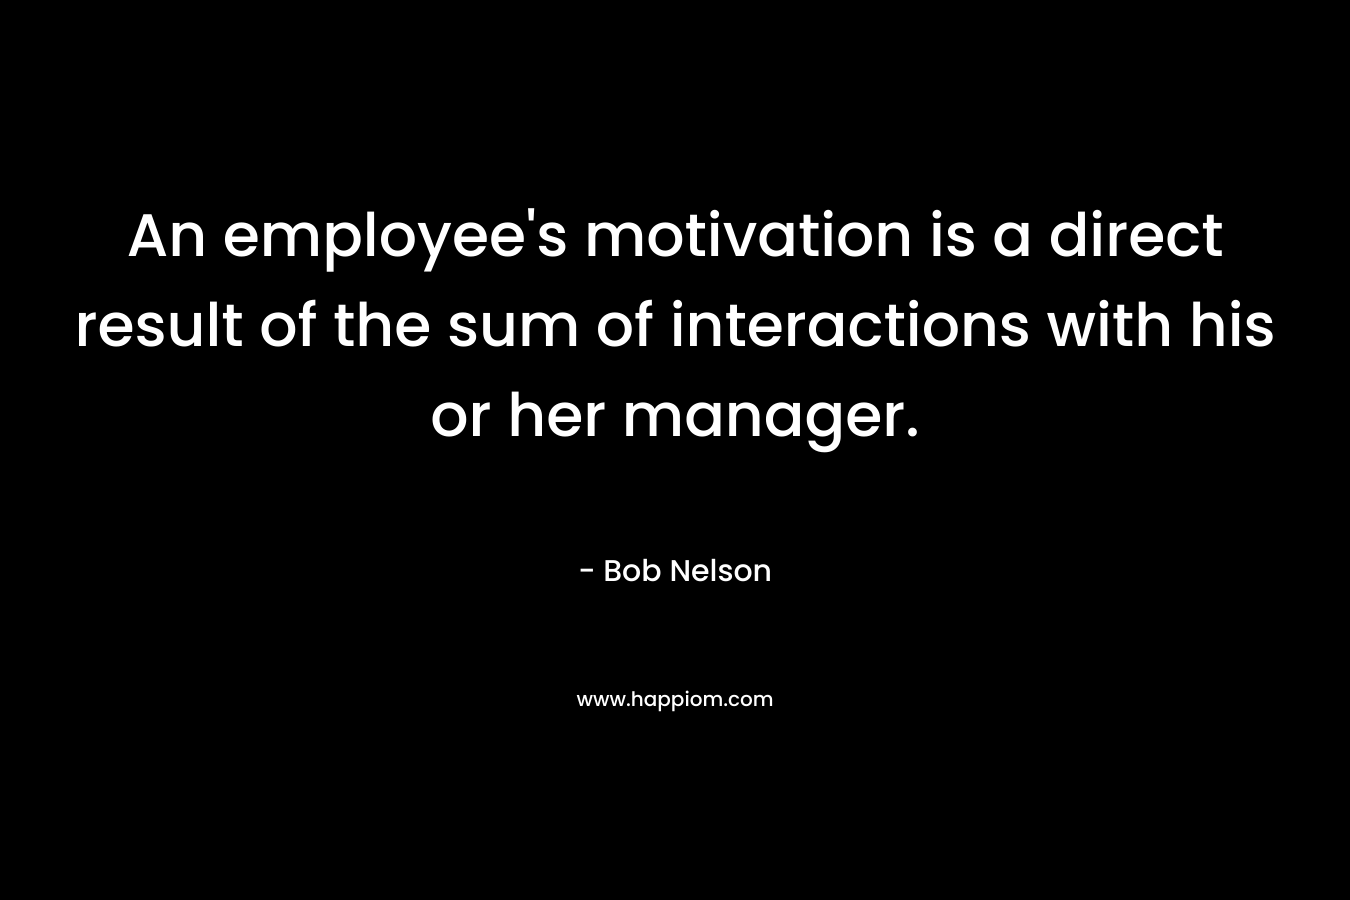 An employee’s motivation is a direct result of the sum of interactions with his or her manager. – Bob Nelson